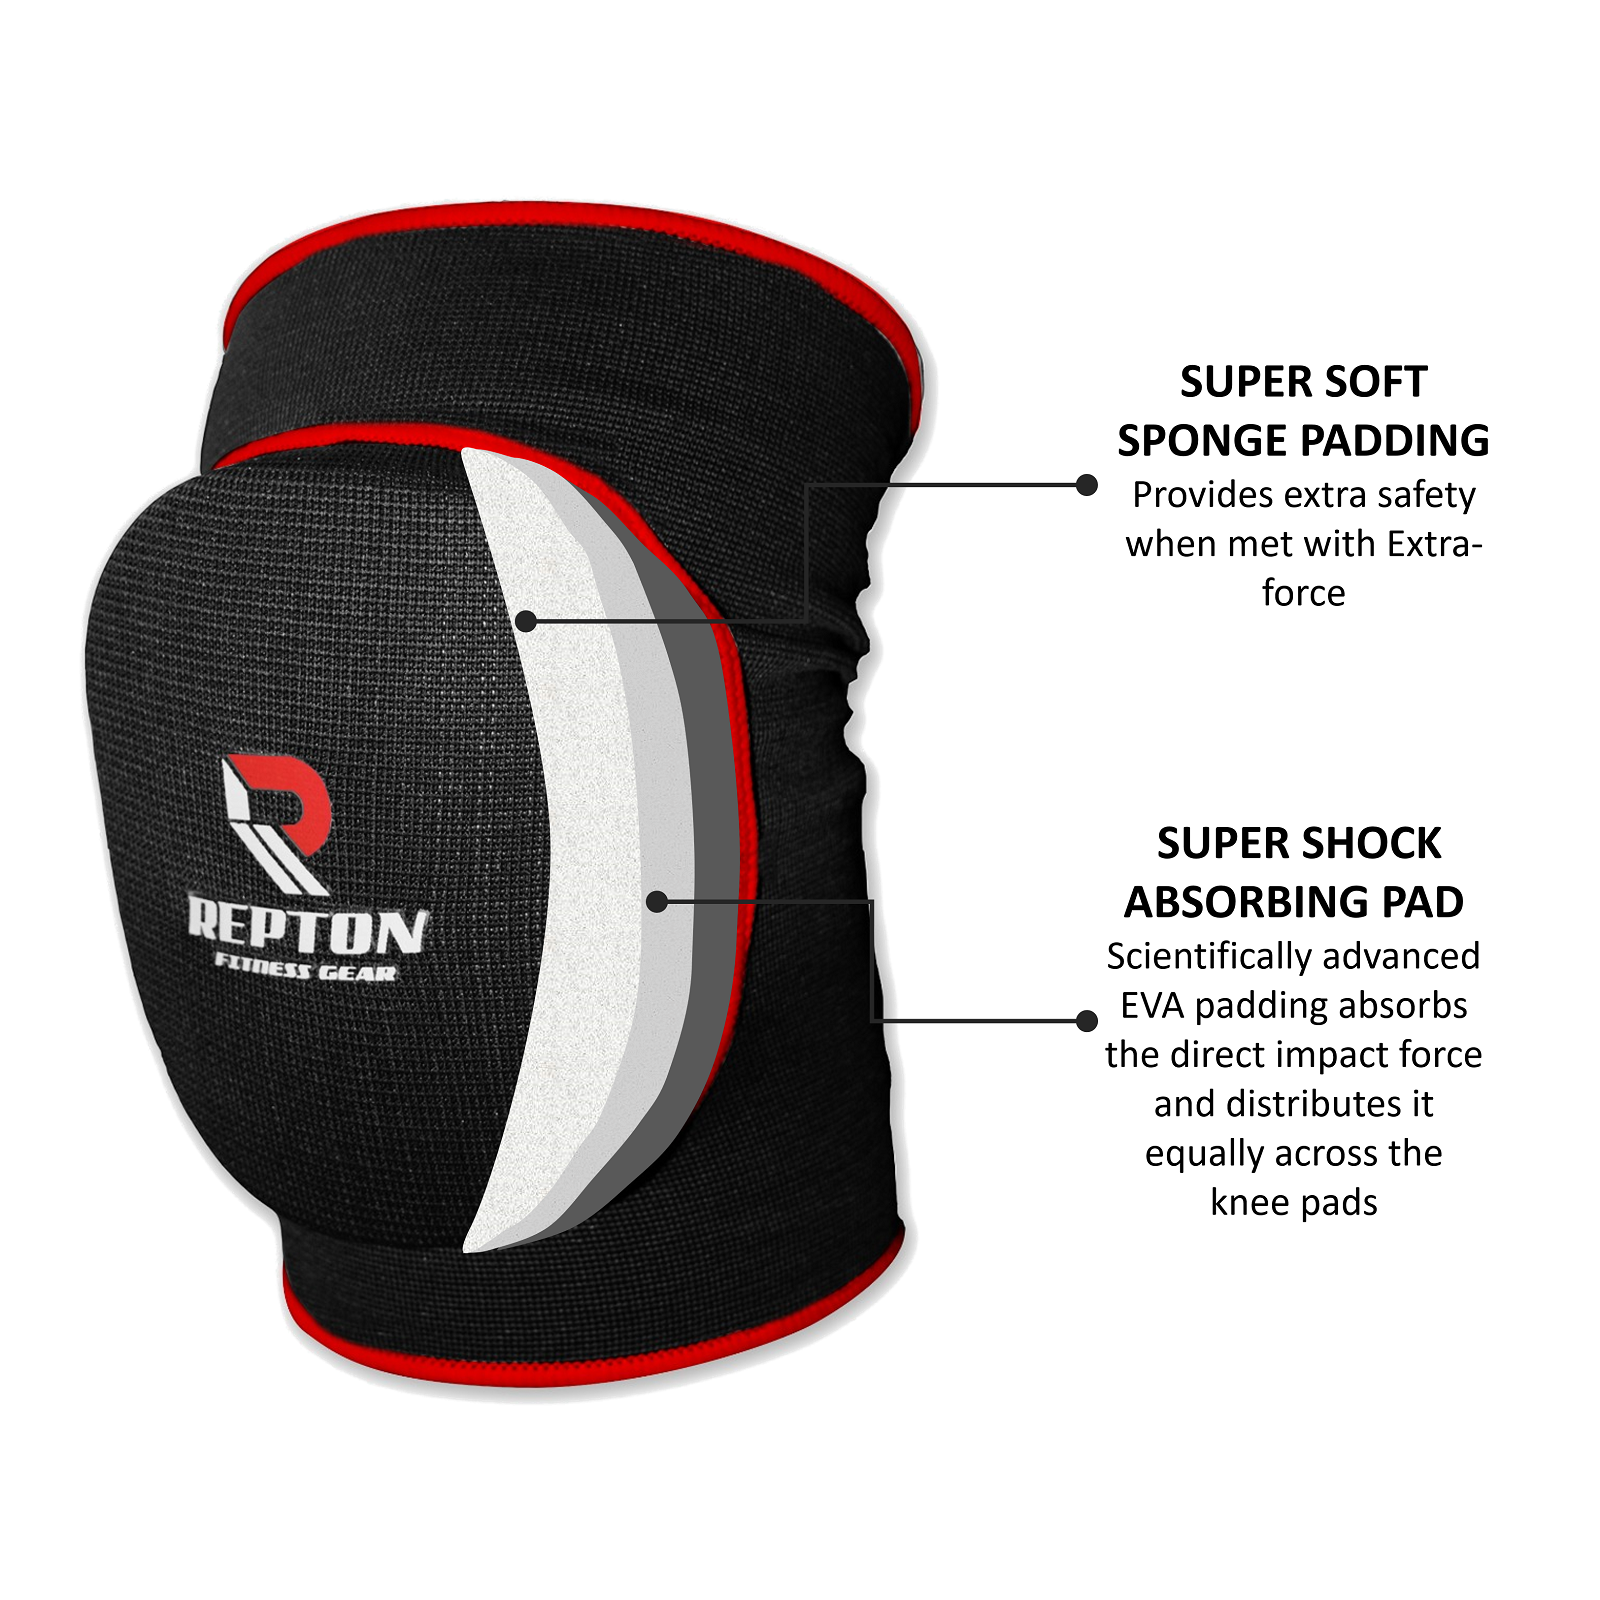 Elasticated Gel Padded Knee Support Sleeves for Heavy Duty Work. Repton Fitness Gear